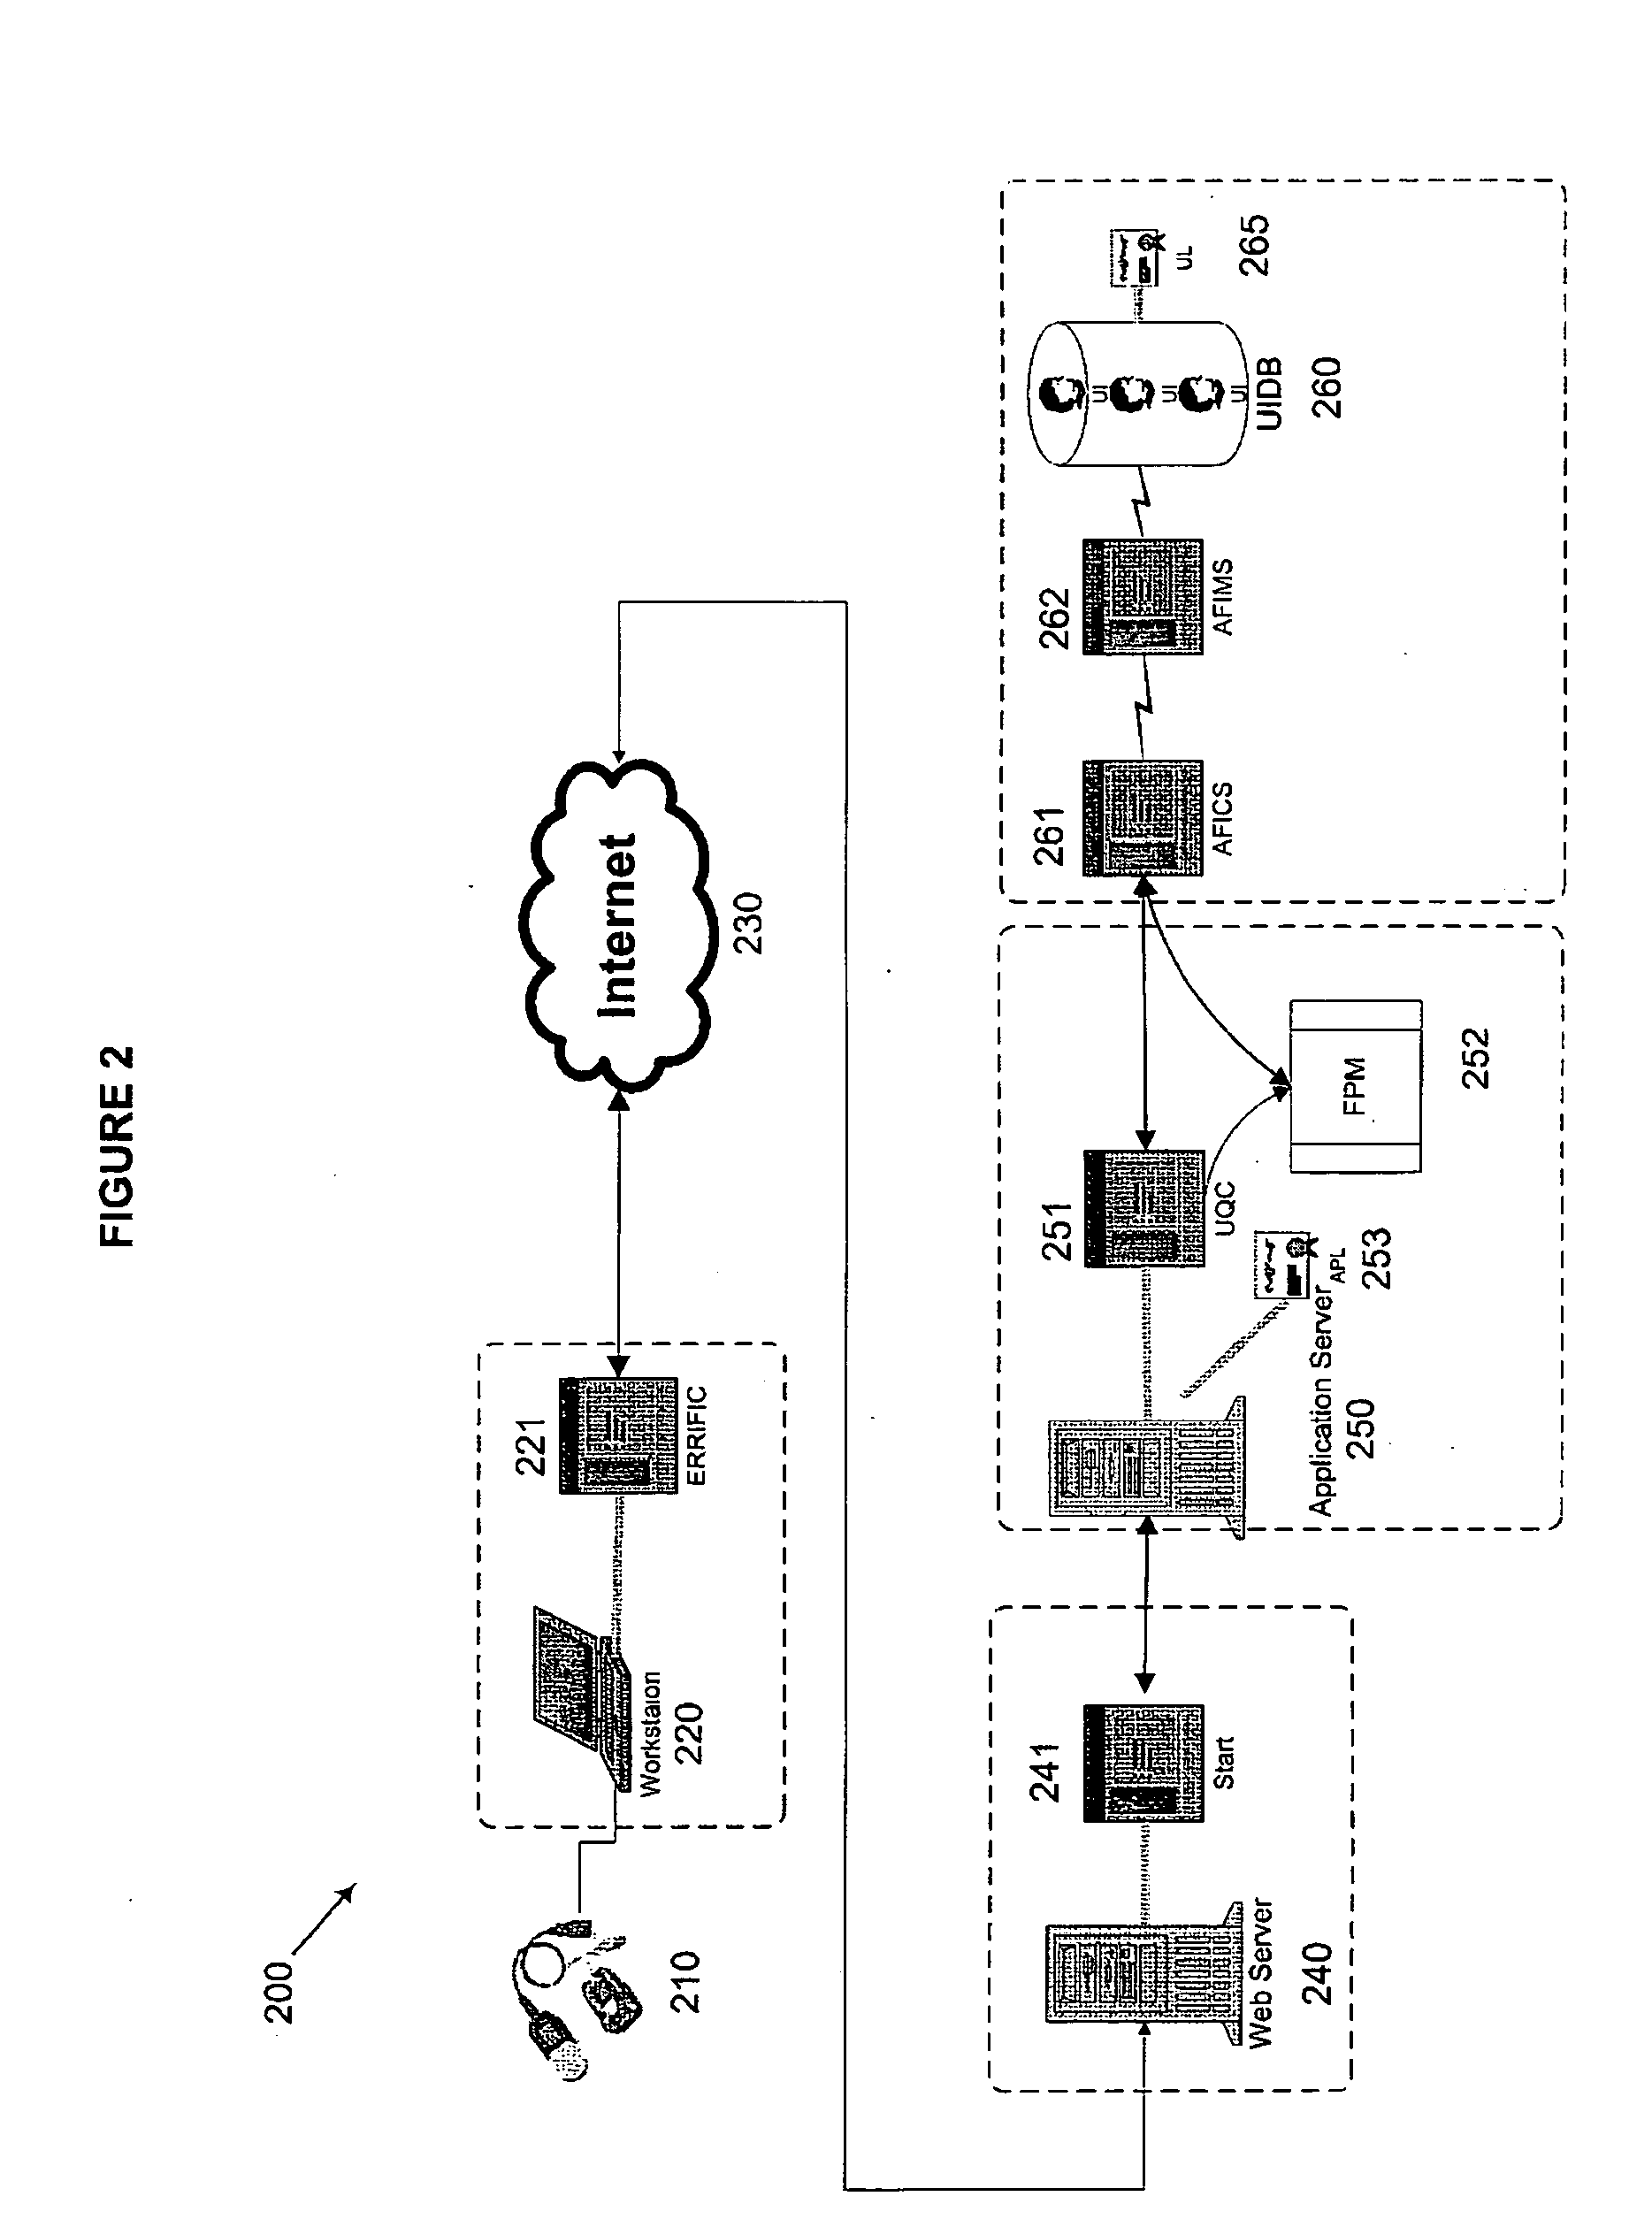 Method and apparatus for producing a biometric identification reference template